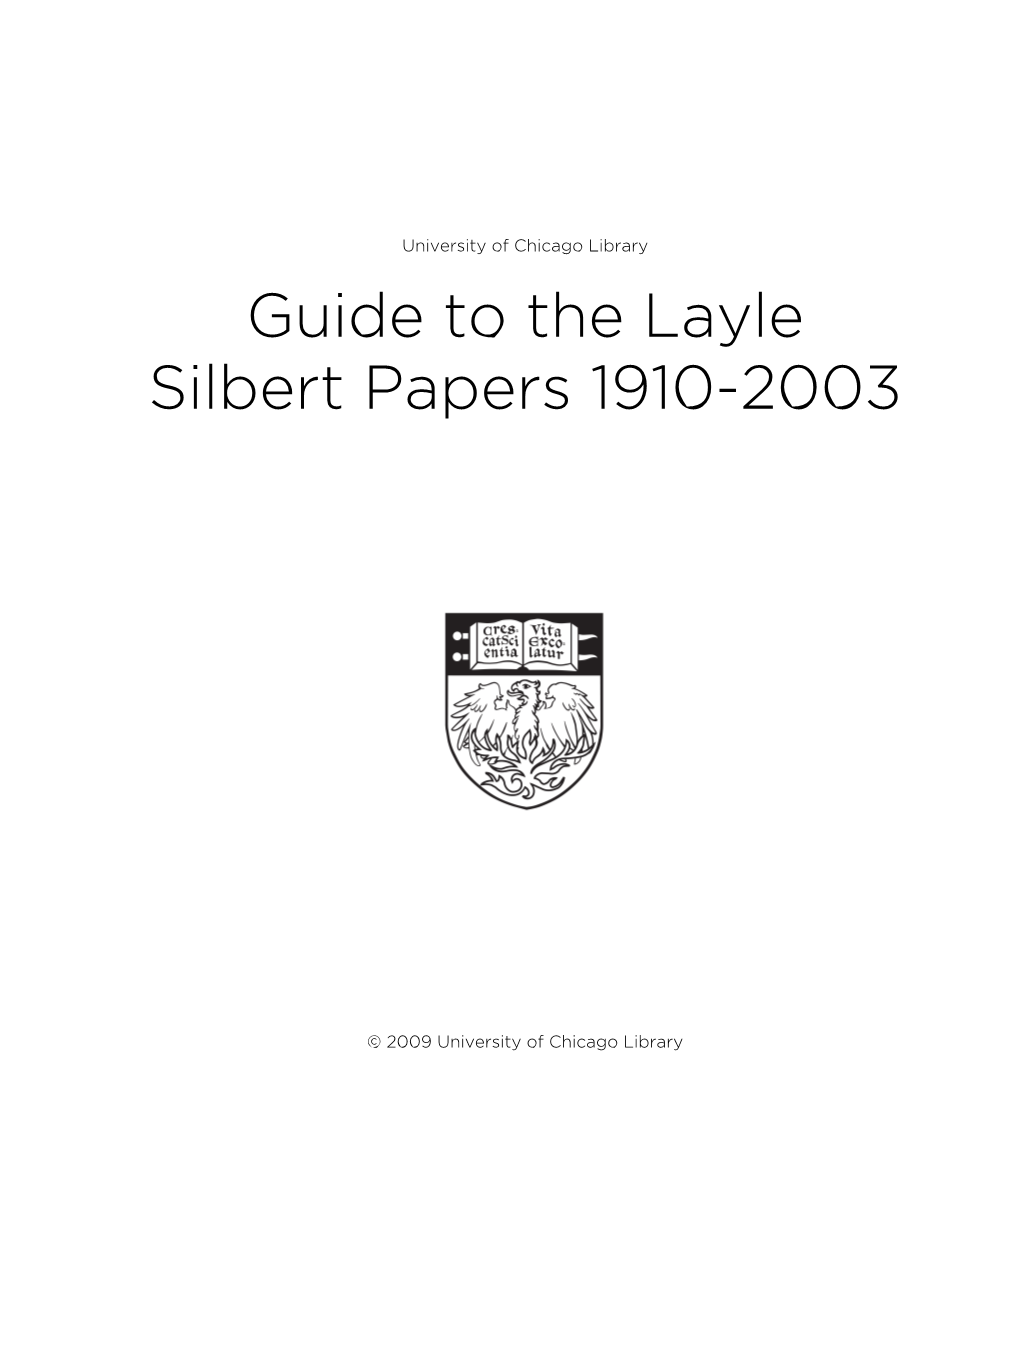 Guide to the Layle Silbert Papers 1910-2003